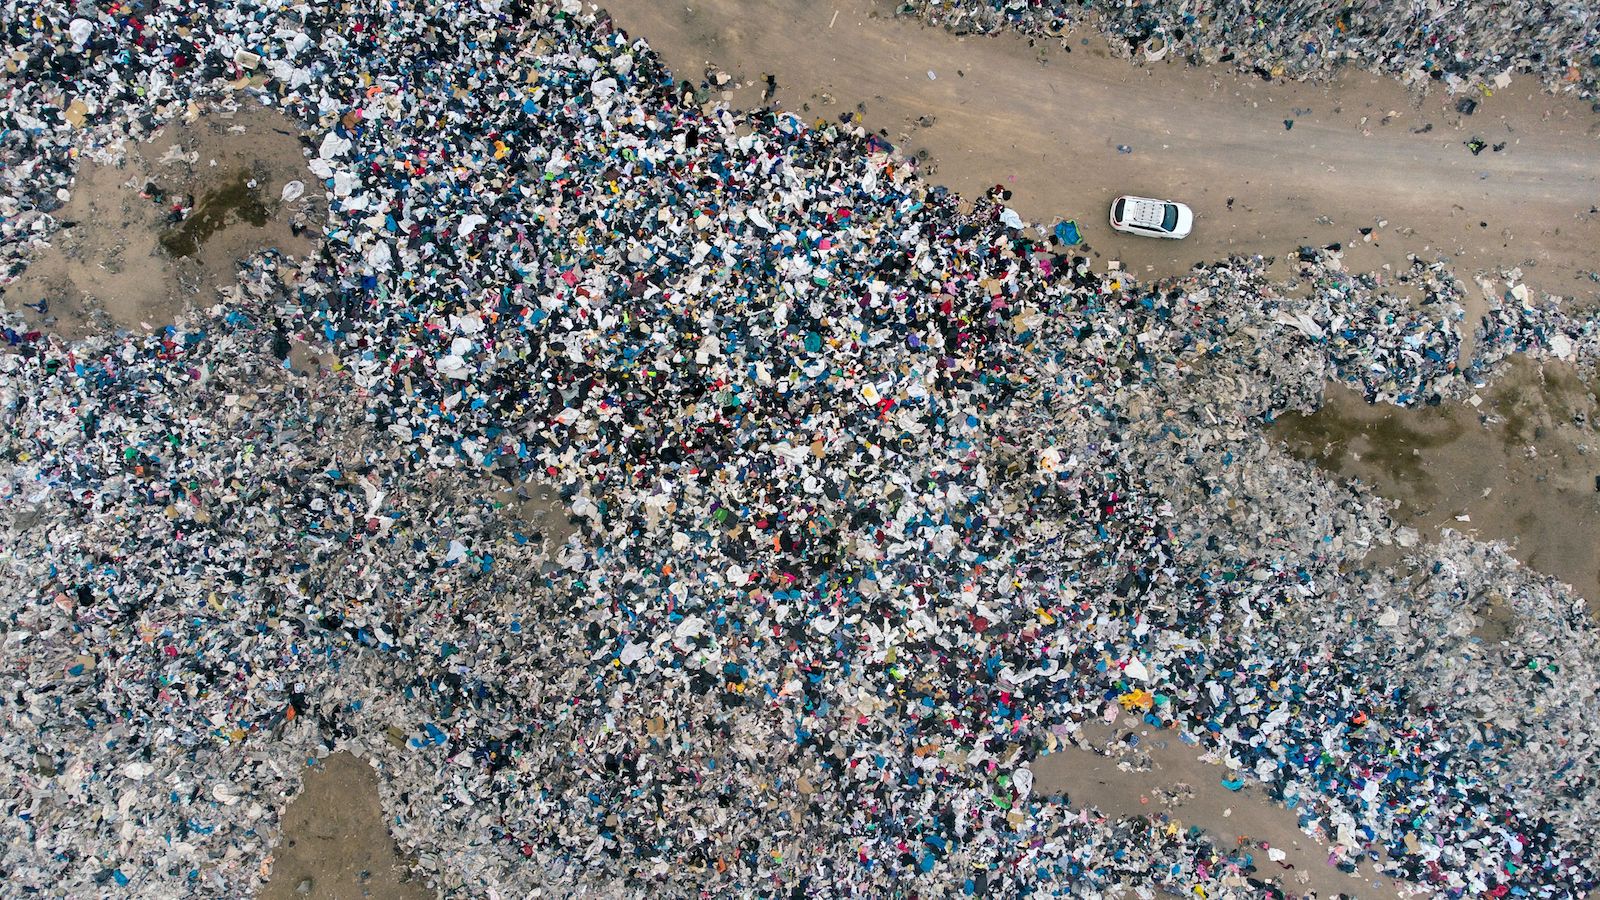 a huge pile of clothing in the desert as seen from a drone